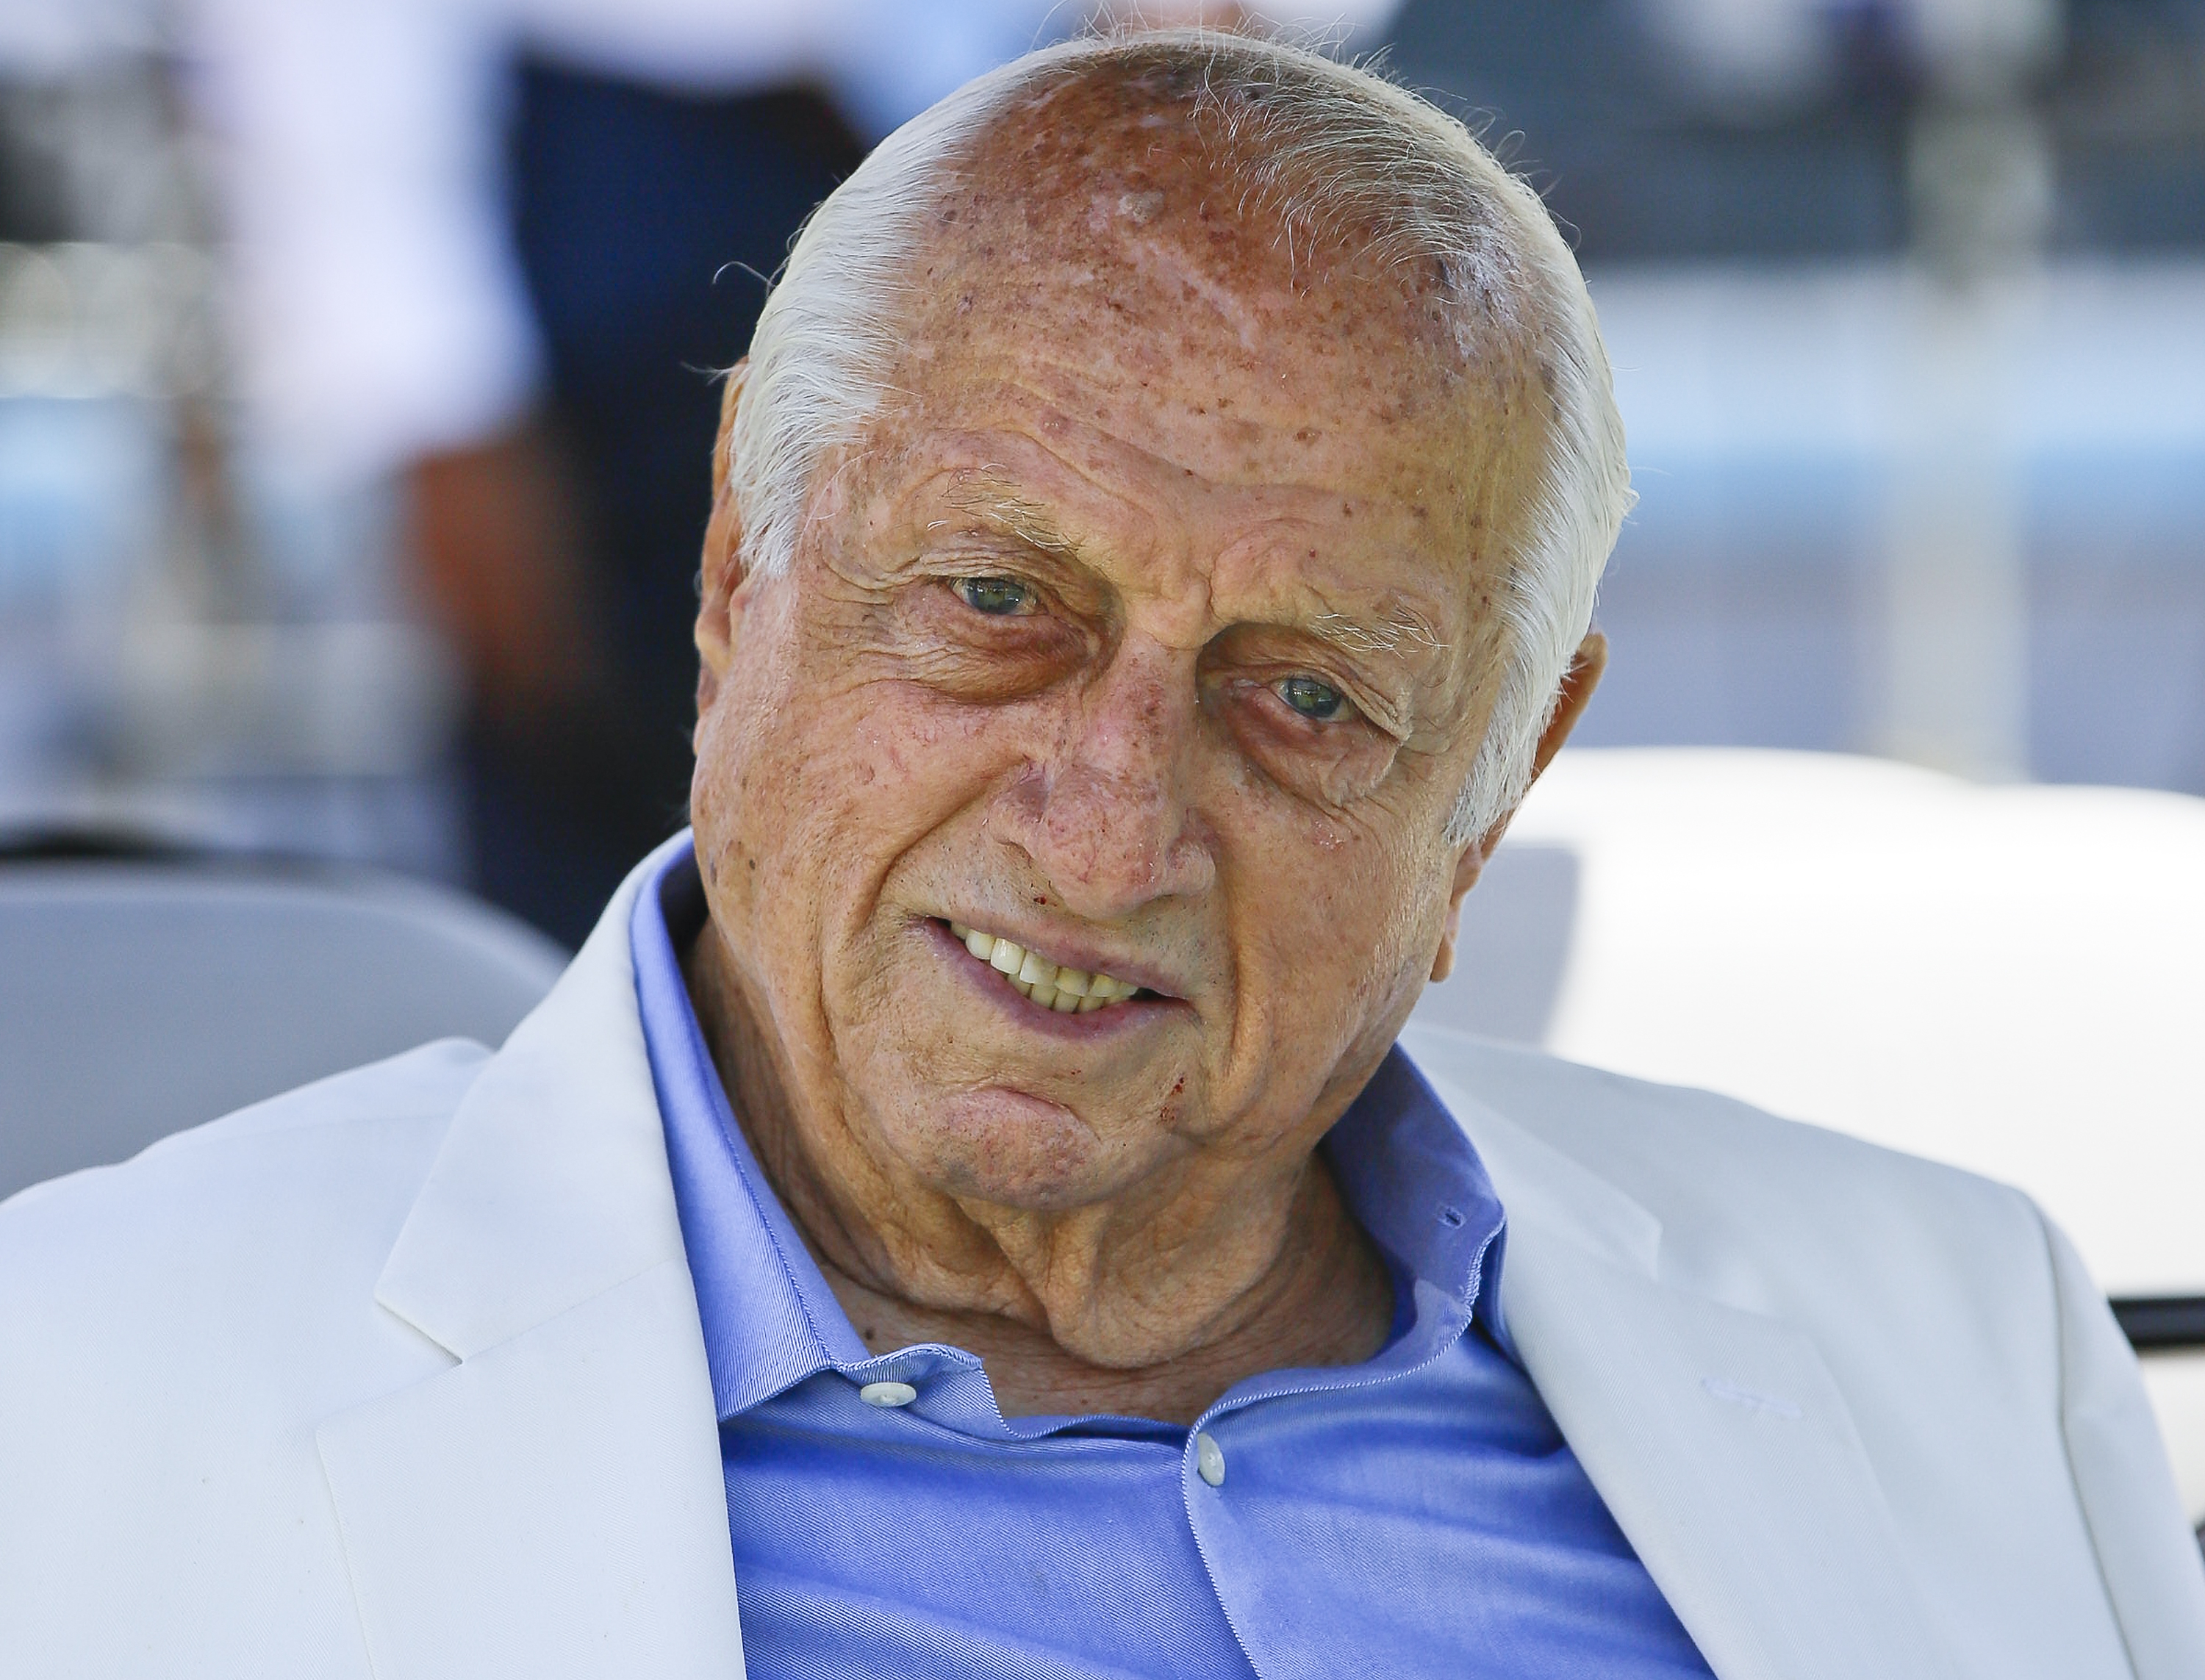 Hall of Fame manager Tommy Lasorda dead at 93 – Action News Jax